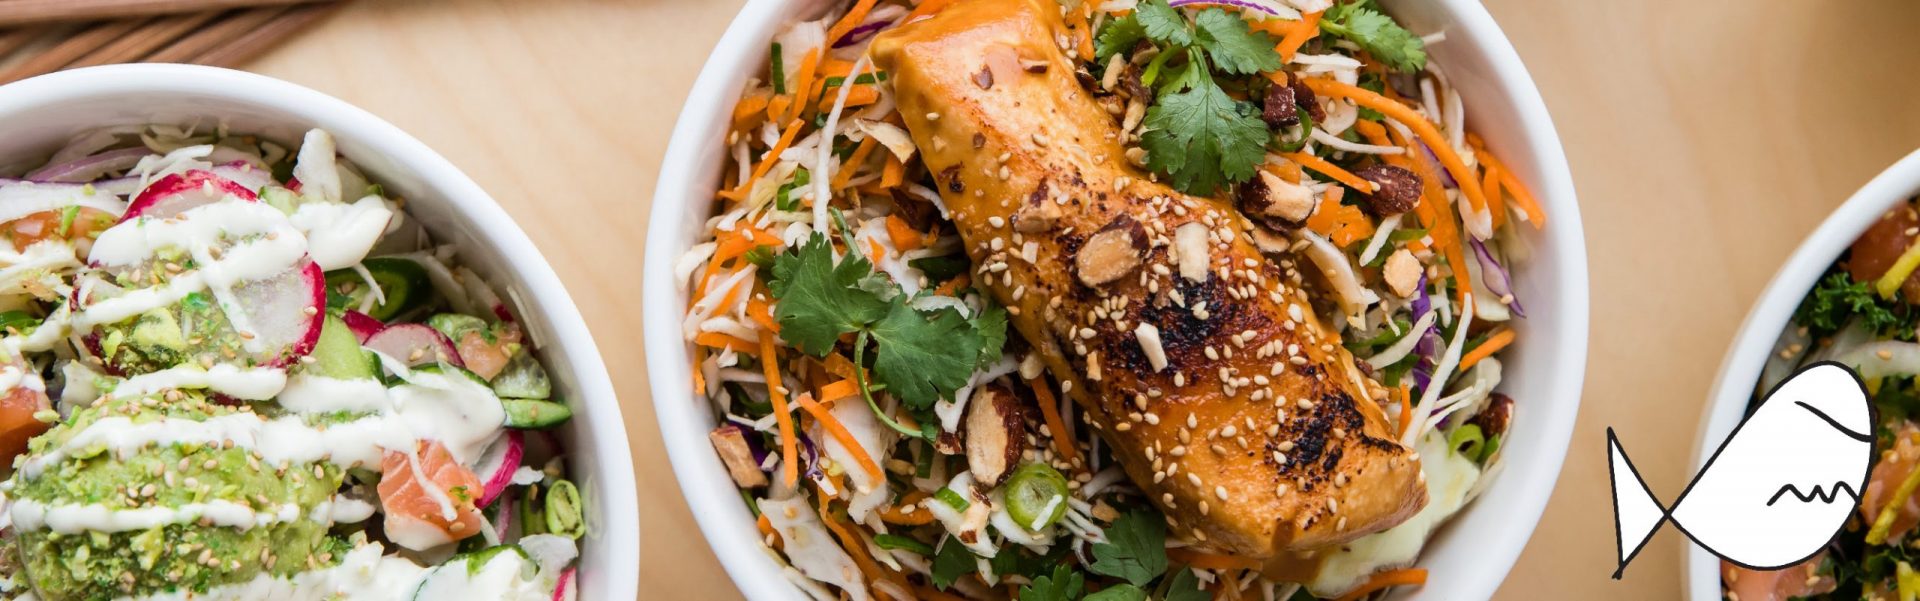 DEAL: Fishbowl - 20% off Orders with $10 Minimum Spend via Deliveroo (until 7 July 2022) 5